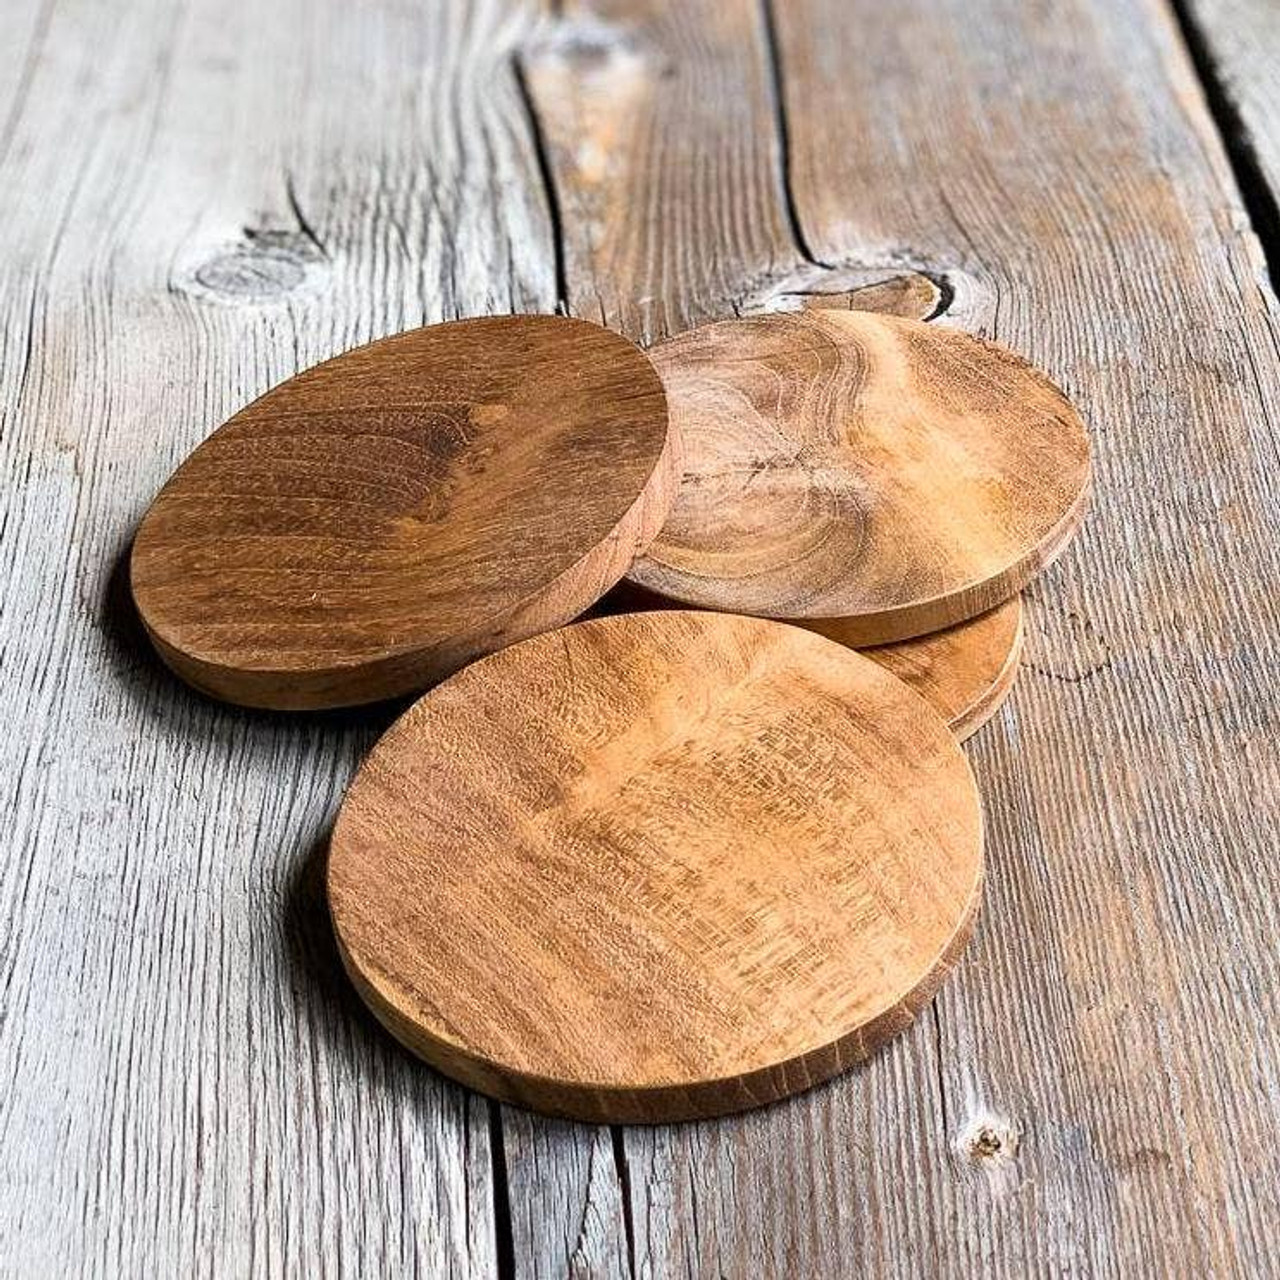 Teak Wood Coasters Set of 4, Square with Inner Square 9cm. Bamboo